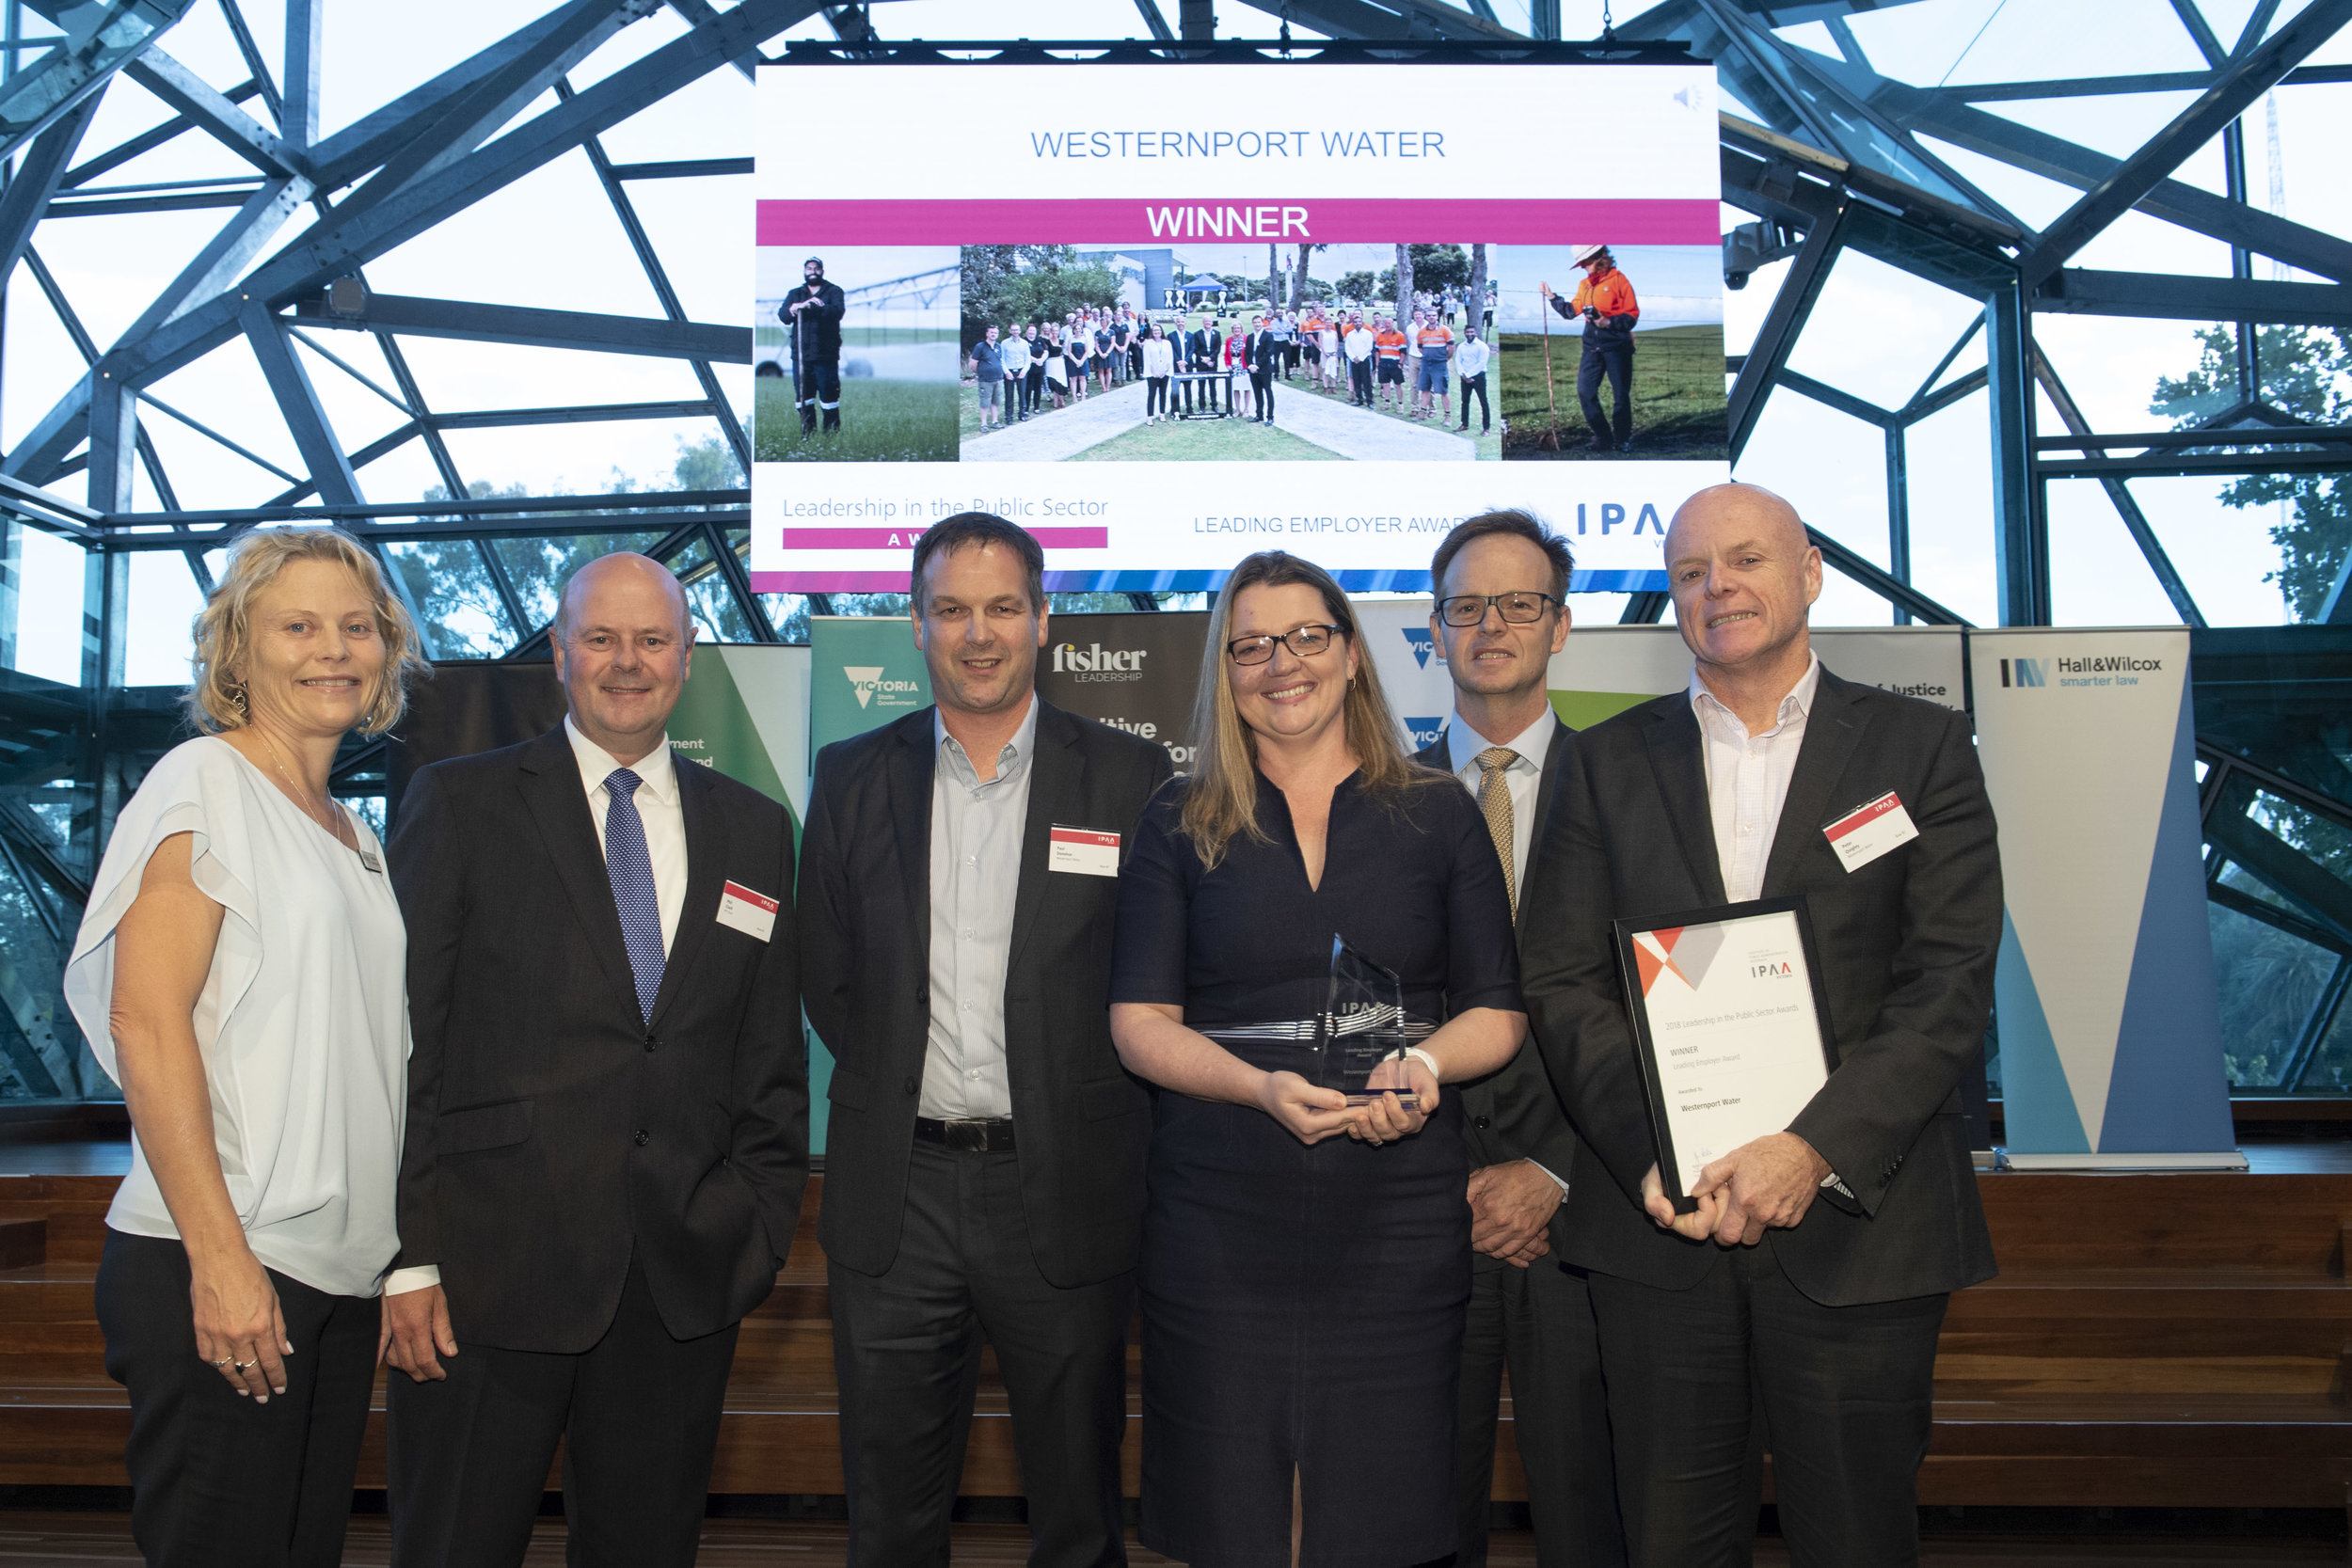 Westernport Water won the Leading Employer award at the 2018 IPAA Victoria Leadership in the Public Sector Awards.